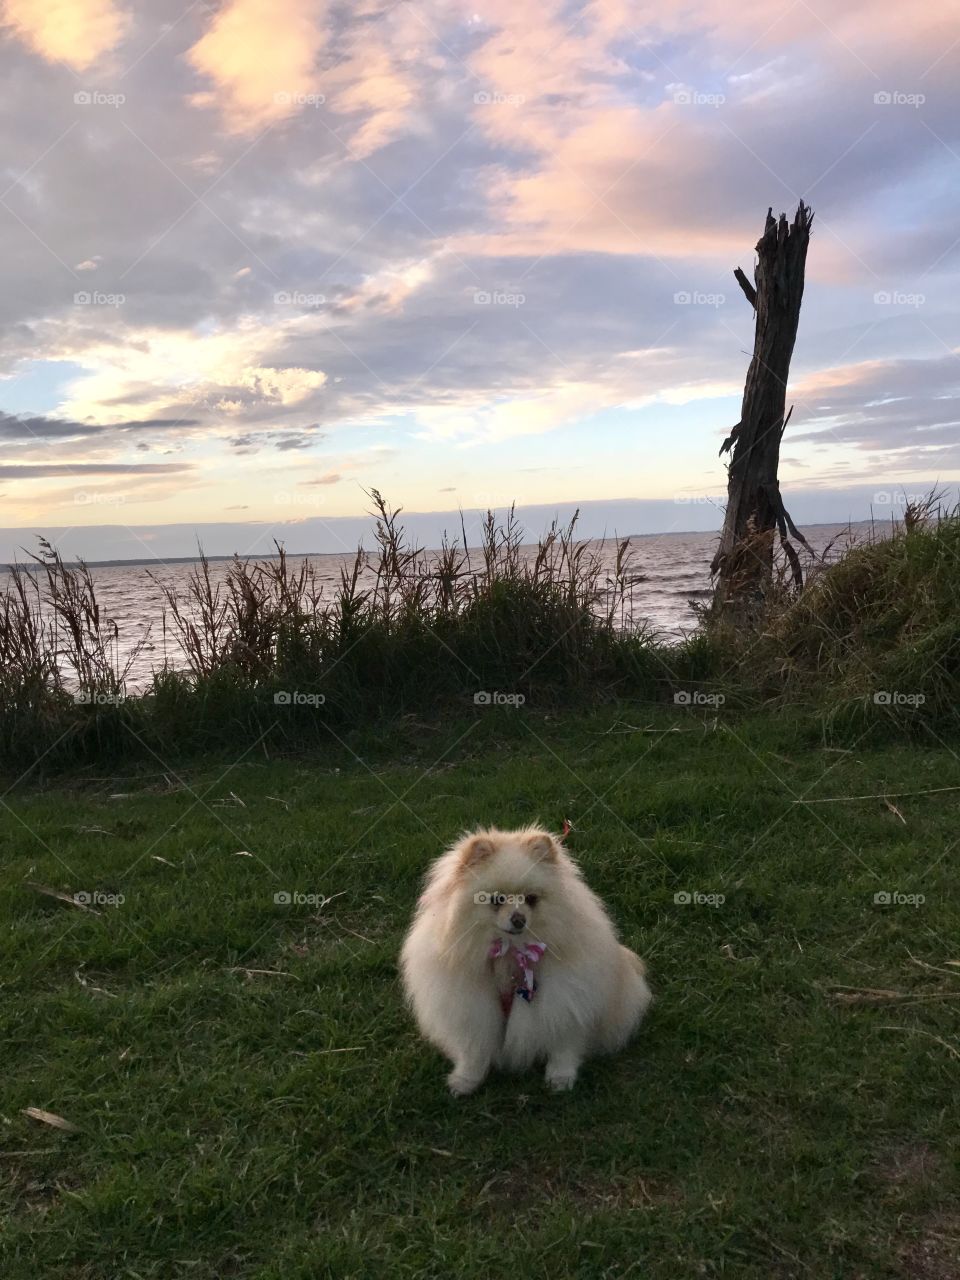 View of the sunset and cute Pom at Granville Beach Melbourne Australia 